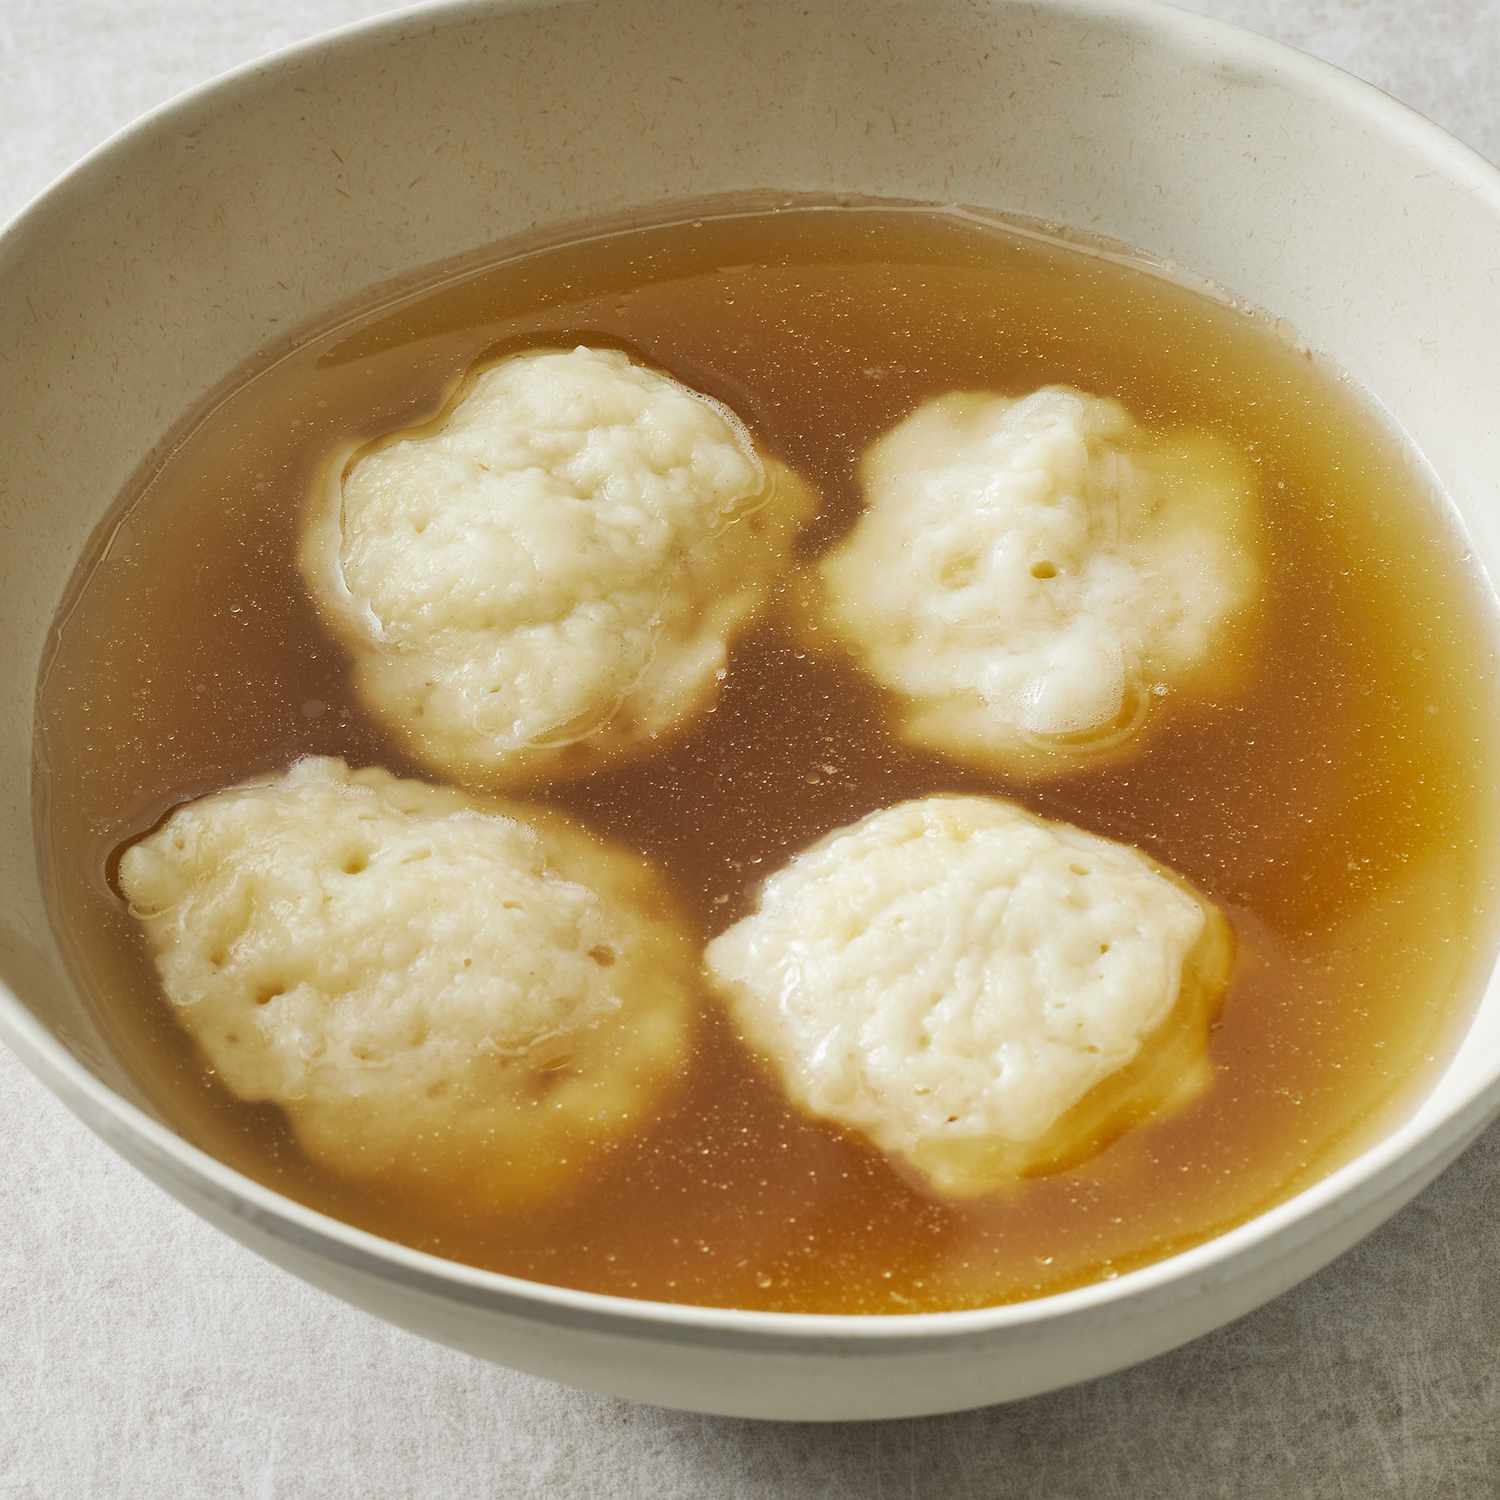 a close up view of a bowl with four fluffy dumplings in a clear broth